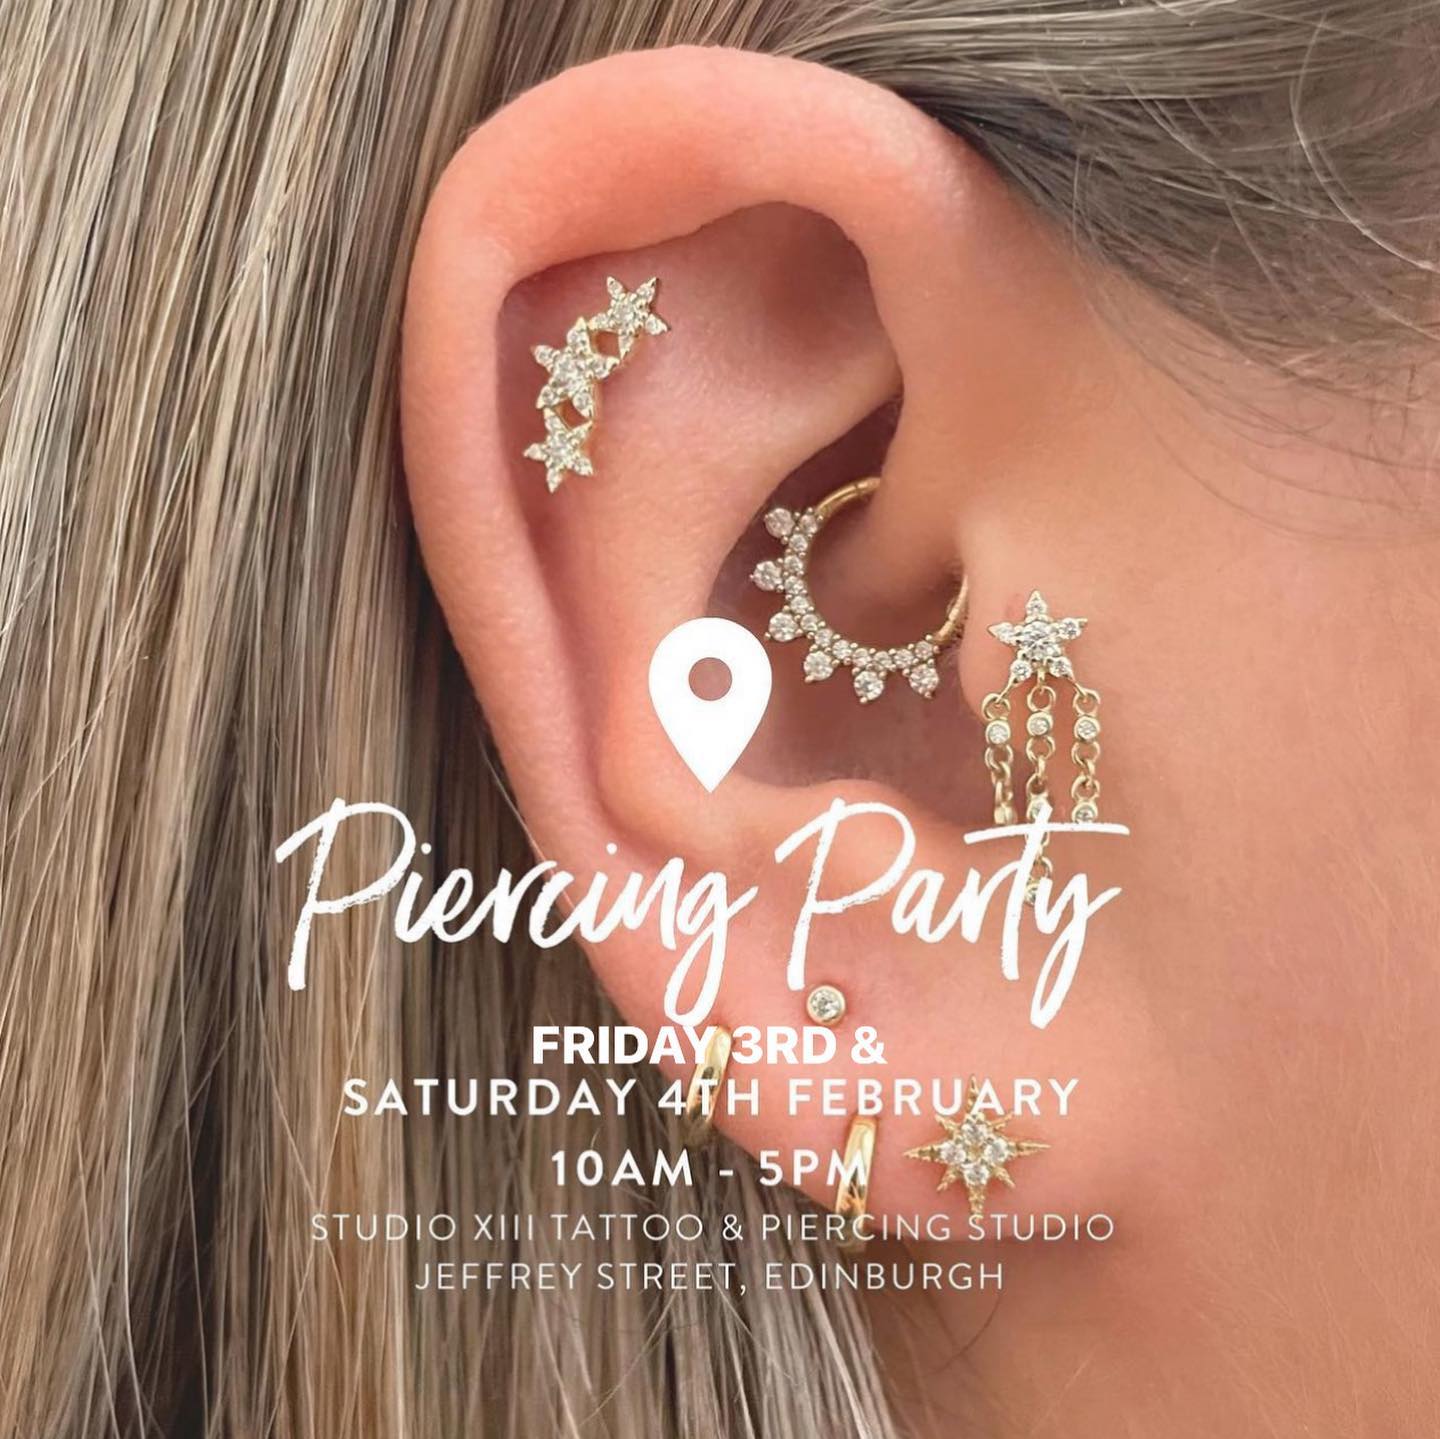 We are very excited to be hosting another two day ✨ PIERCING ✨ pop up store with our friends at Laura Bond on Friday the 3rd & Saturday the 4th of February!

Once you have signed up through Laura Bond’s website - you need to book a piercing appointment with us. There are only a few spaces remaining so give us a call to book your piercing slot ASAP! Then arrive early on the day to browse, select and purchase your piercing jewellery from Laura Bond’s gorgeous collection. 

We recommend coming along 15 - 30 minutes before your appointment to choose your jewellery & fill out your consent form if you have not already done so!

☎️ 0131 558 2974

Pop up store opening hours 🕓
Friday 3rd February - 10am - 6pm
&
Saturday 4th February - 10am - 6pm
*last entry for shopping 5:15pm

Location📍
Studio XIII, Jeffrey Street, Edinburgh, EH1 1DR - just a 5 minute walk from Waverley train station.

✨ Piercings will be £30 each, this does NOT include any Laura Bond Jewellery ✨

We can’t wait to see you all there ✨

      